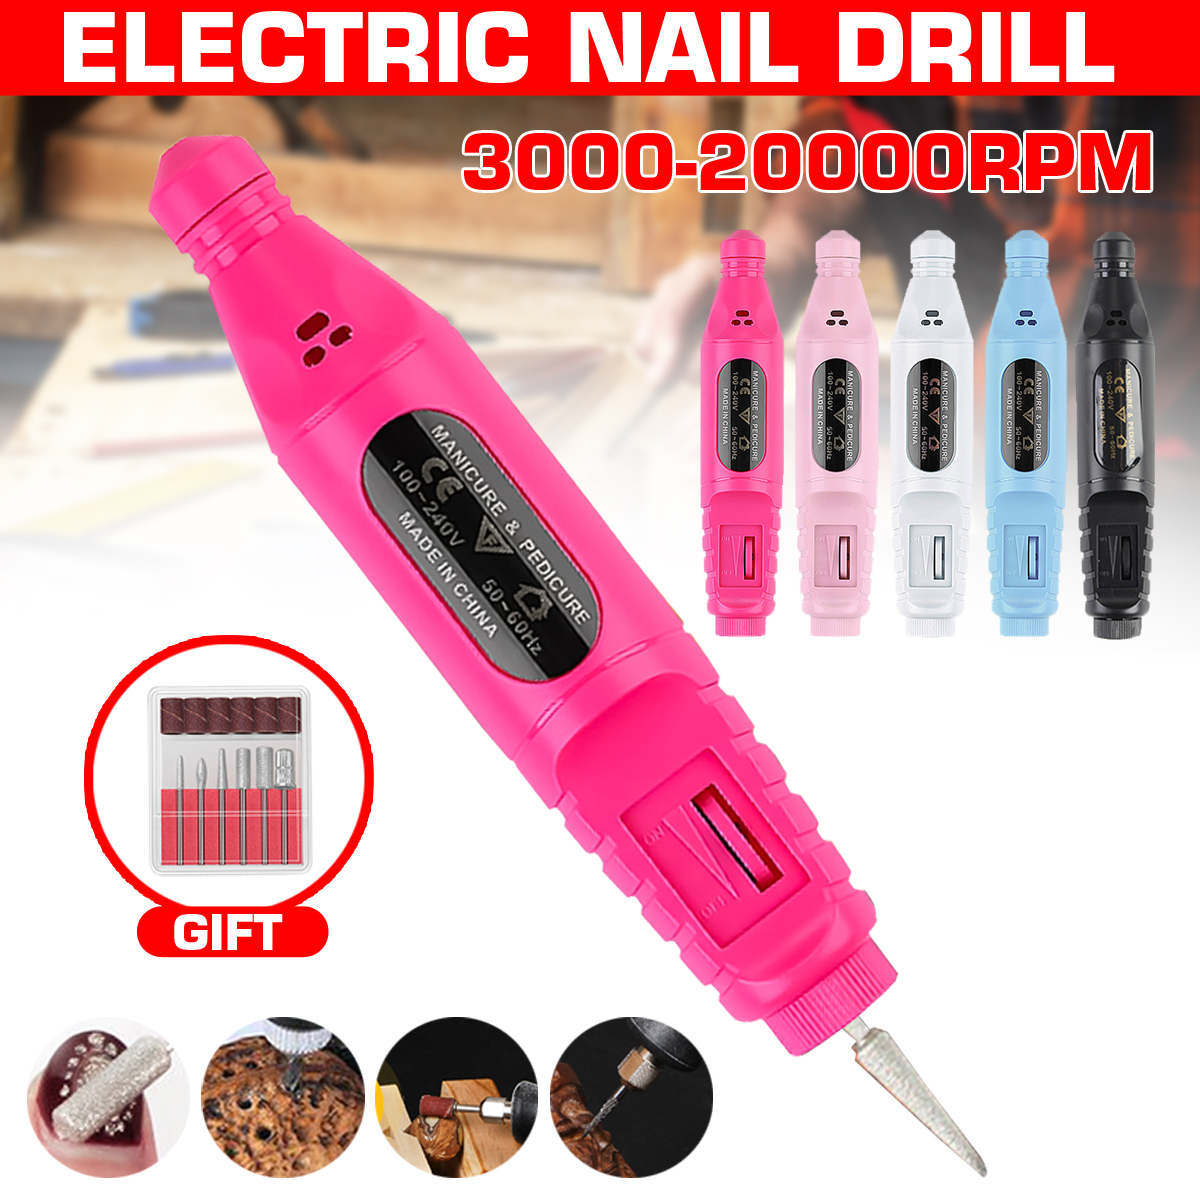 3000-20000-Adjustable-Speed-Pedicure-Manicure-Nail-Polisher-Drill-Electric-Nail-Drill-Machine-USB-Ch-1693708-1